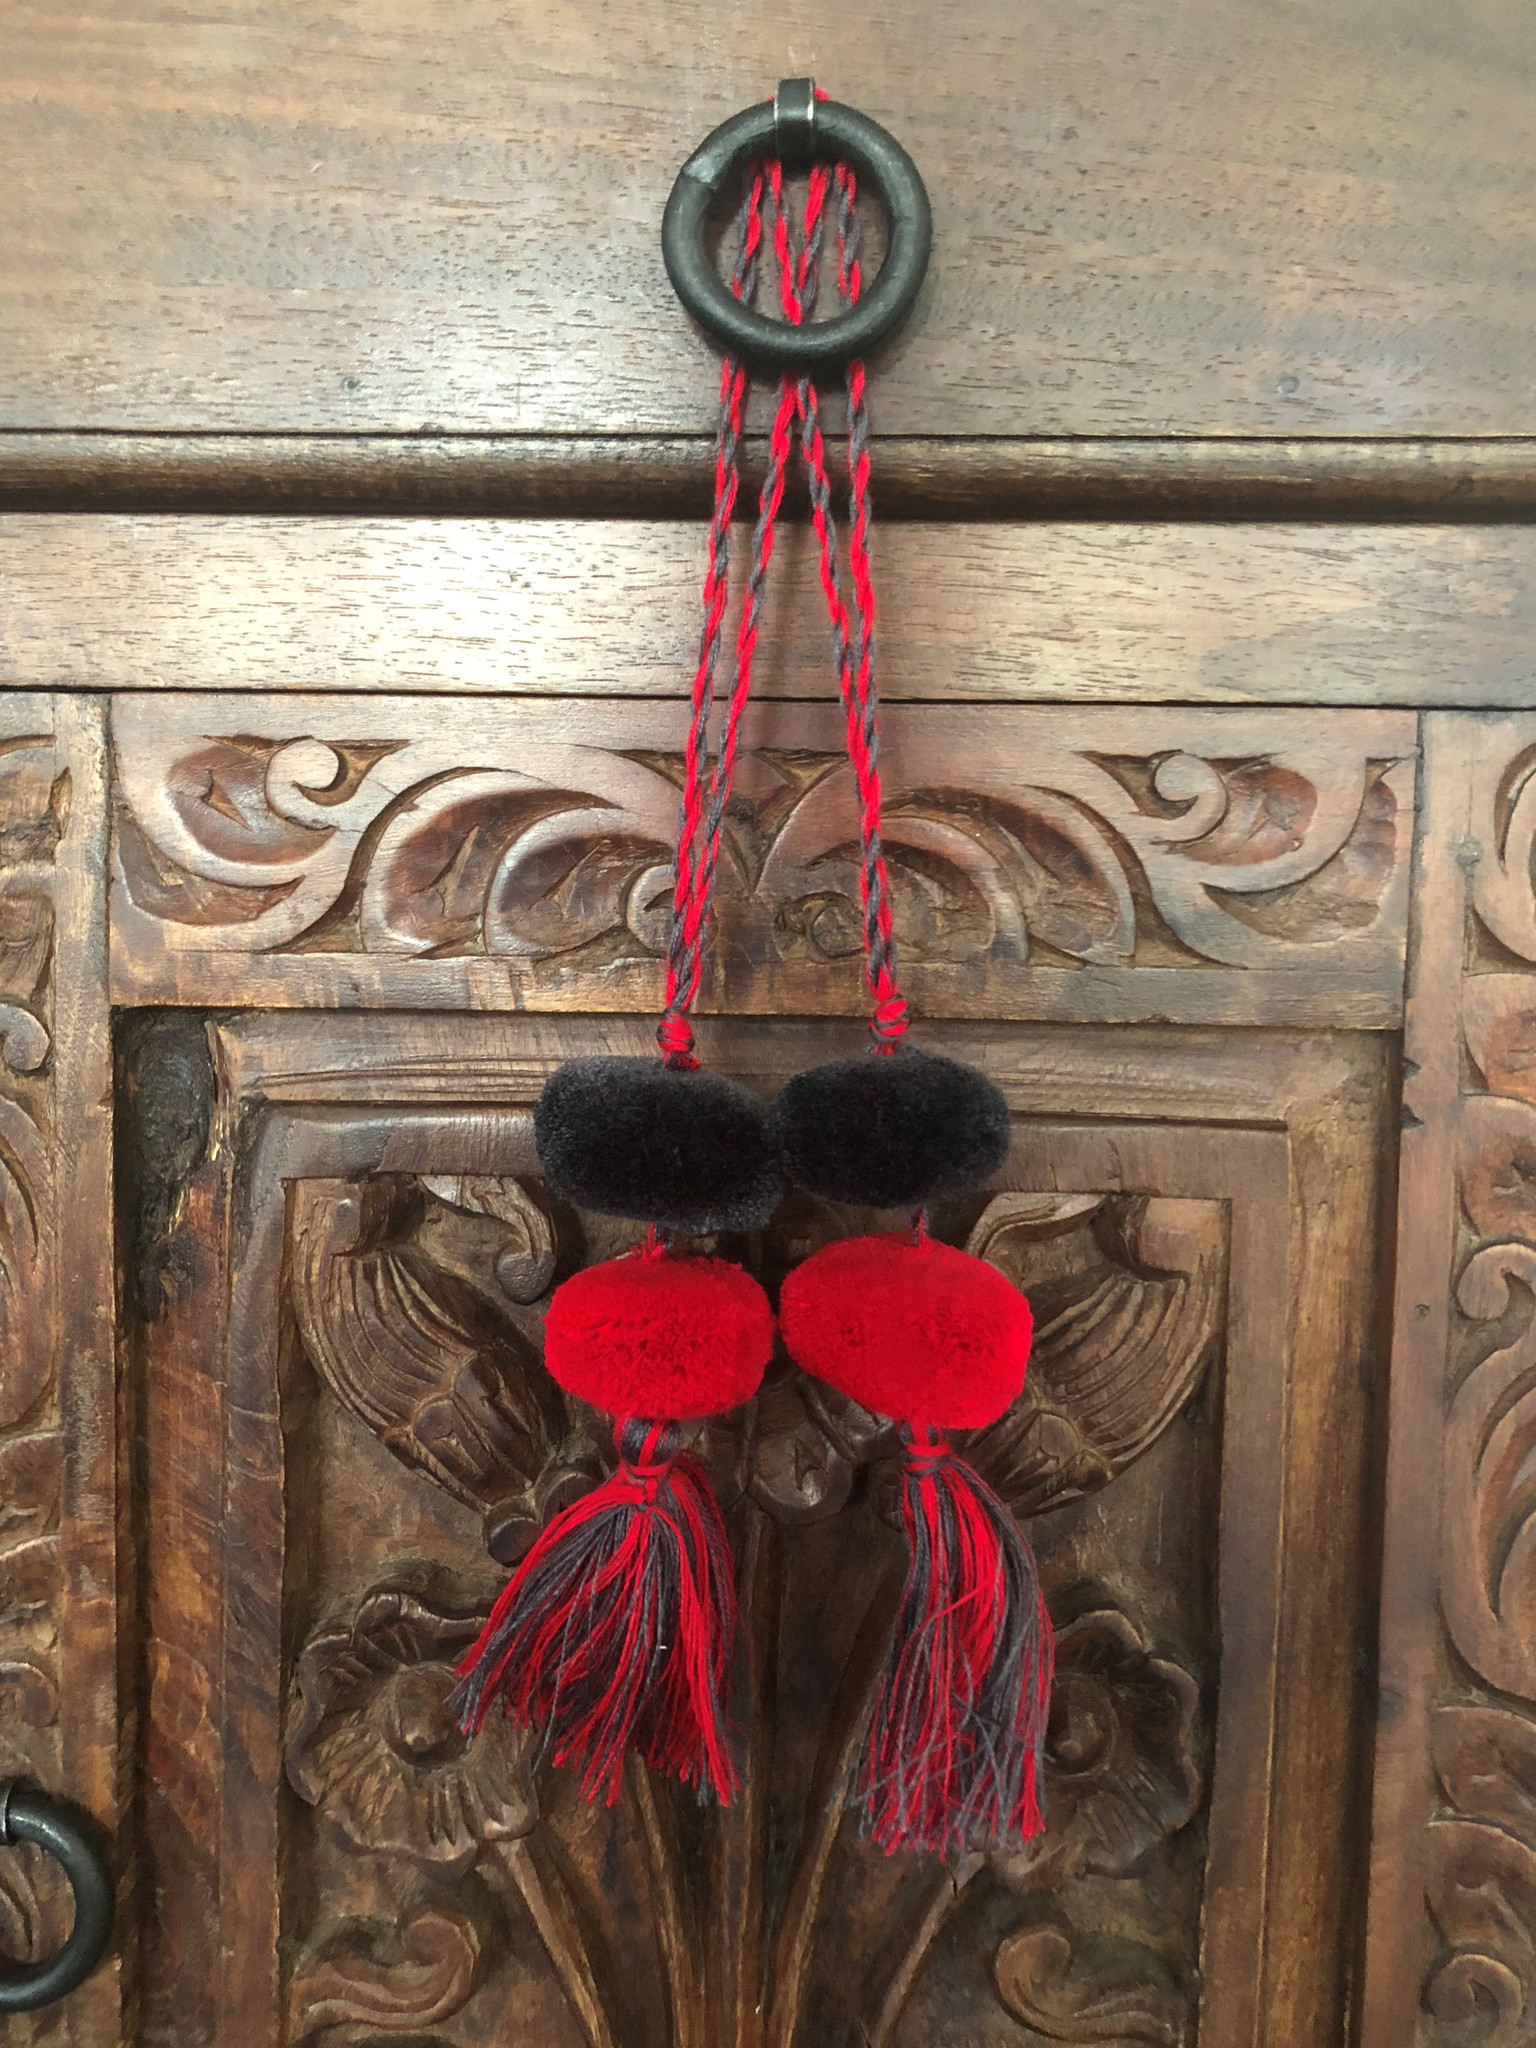 Mayan Arts Tassels with Pom Poms, Red and White, Team School Colors, Home Decor, Gift Tag, Decorative Small Handmade Pom Pom, Fair Trade Guatemala